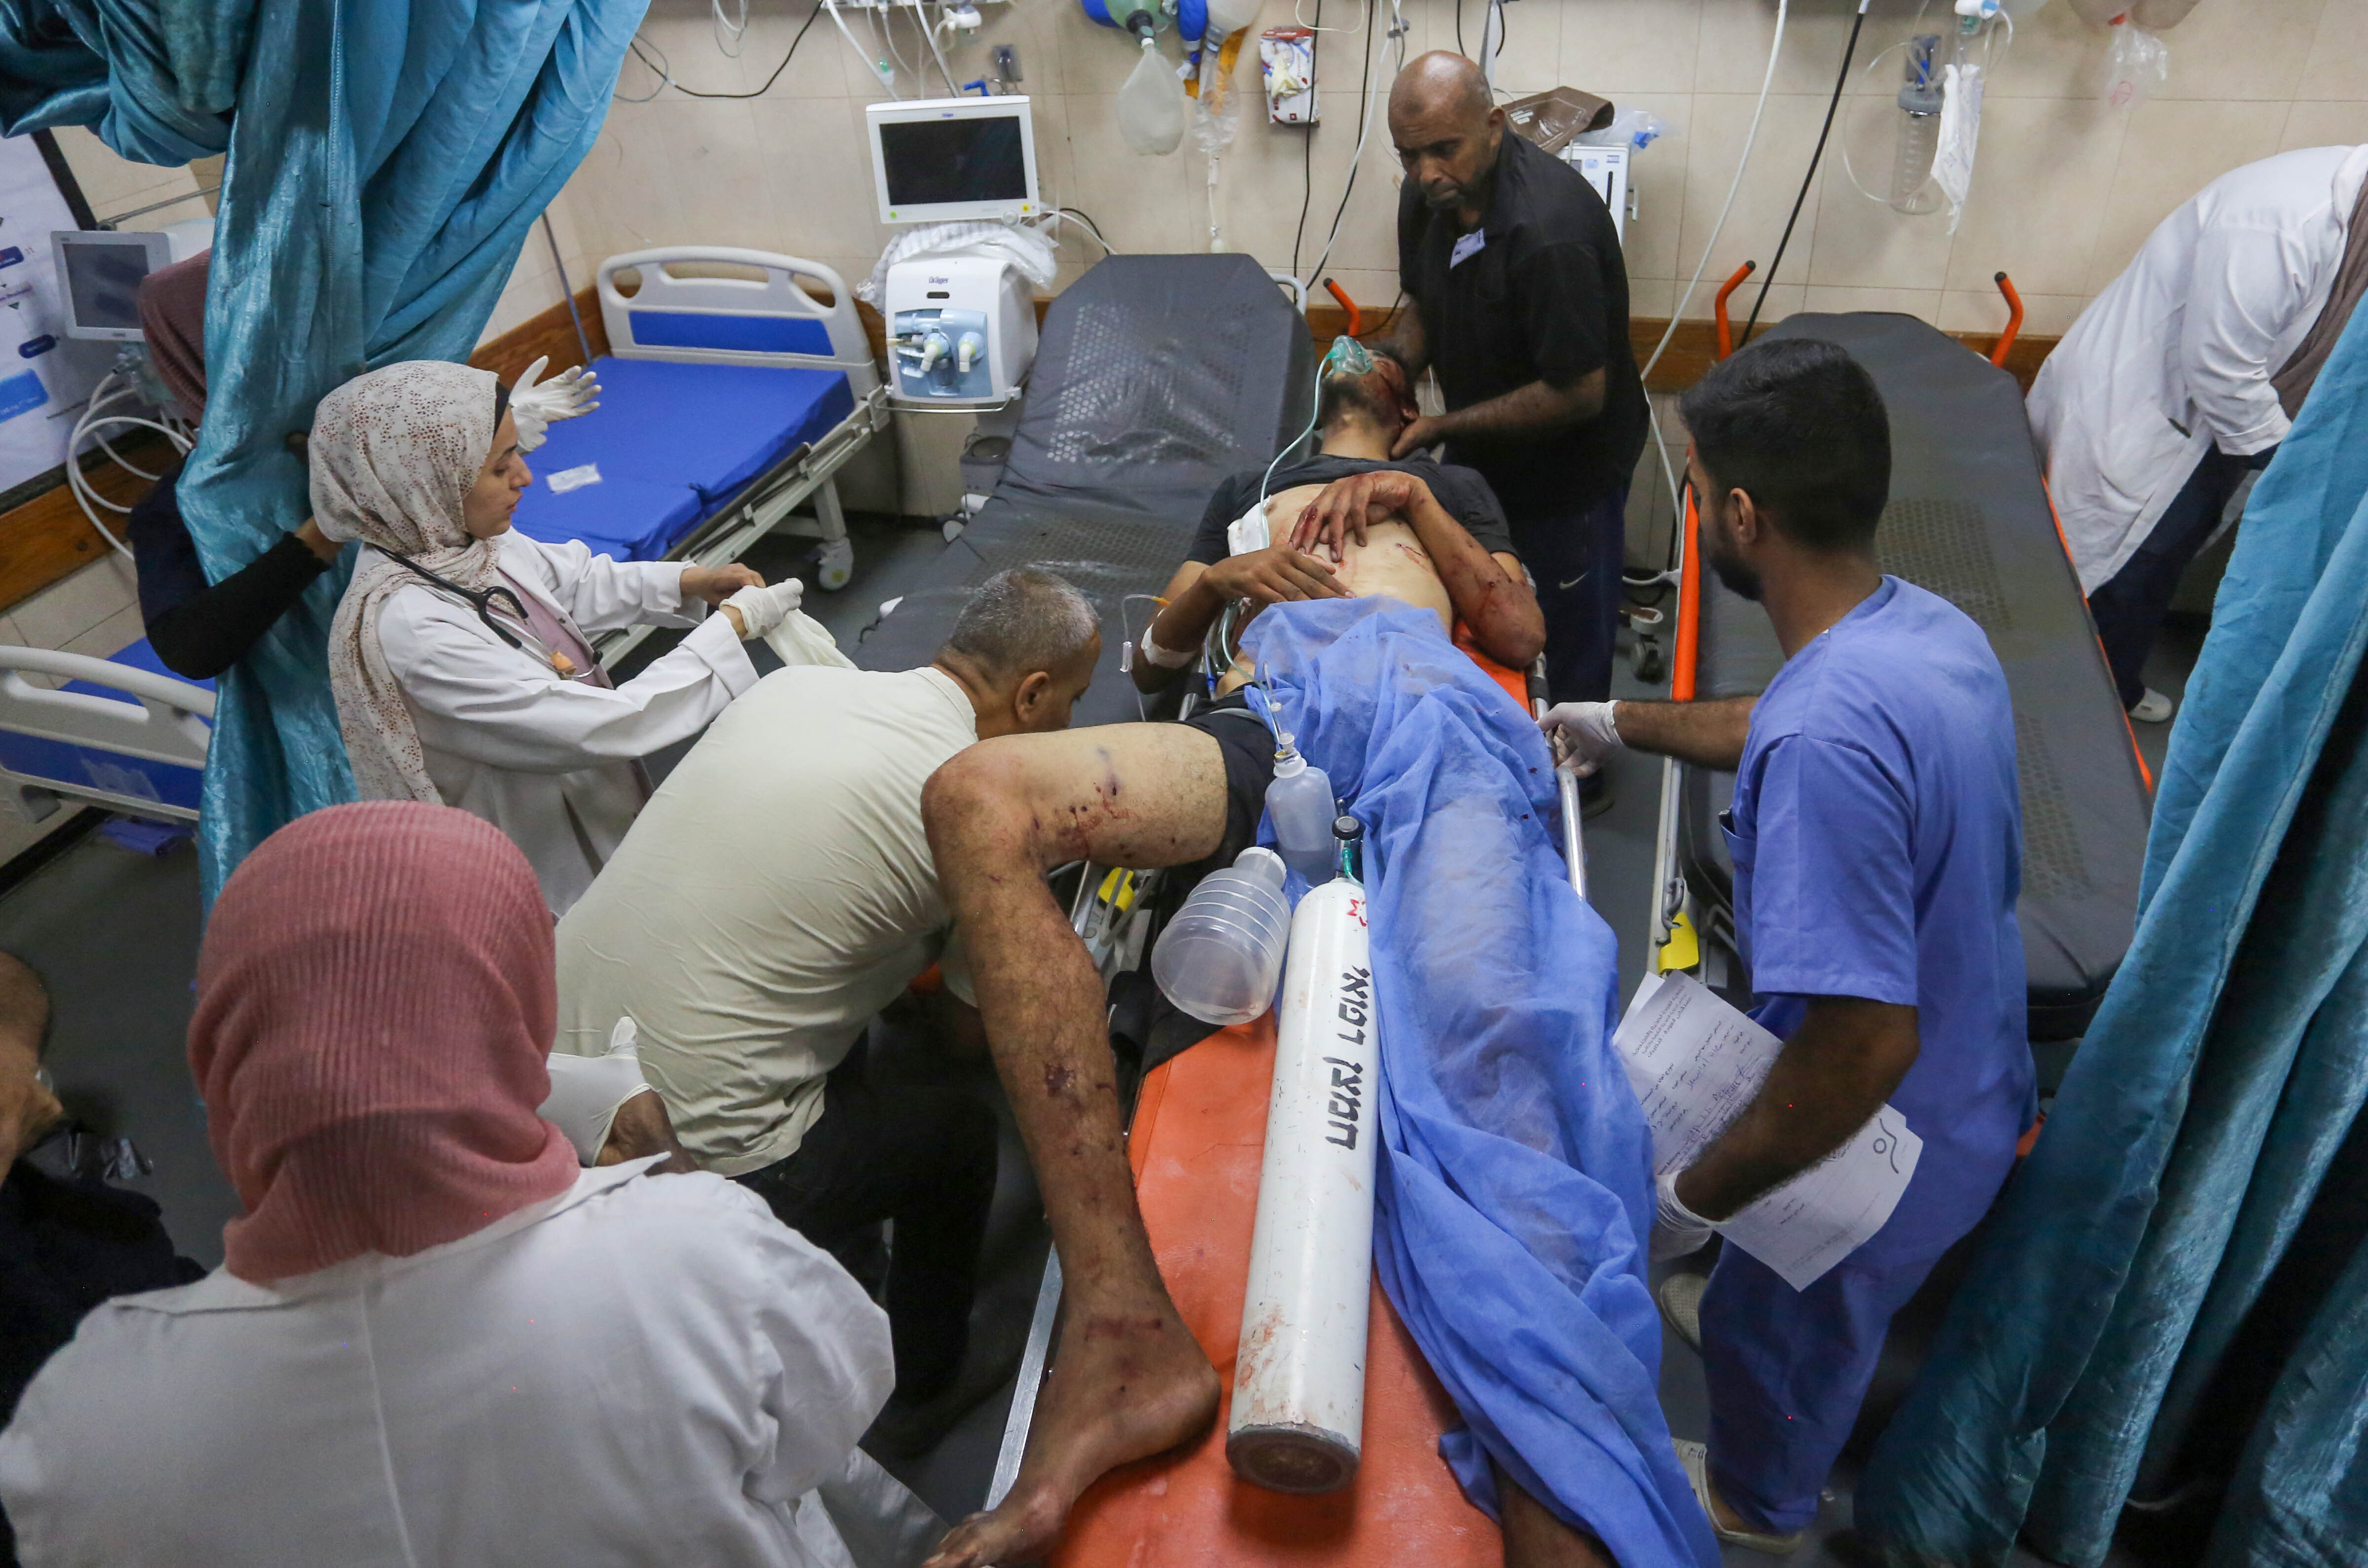 DEIR AL-BALAH, GAZA - AUGUST 05: Palestinians wounded in Israeli attack on Nuseirat refugee camp are brought to al-Aqsa Martyrs Hospital for treatment in Deir al-Balah, Gaza on August 05, 2024. (Photo by Ashraf Amra/Anadolu via Getty Images)